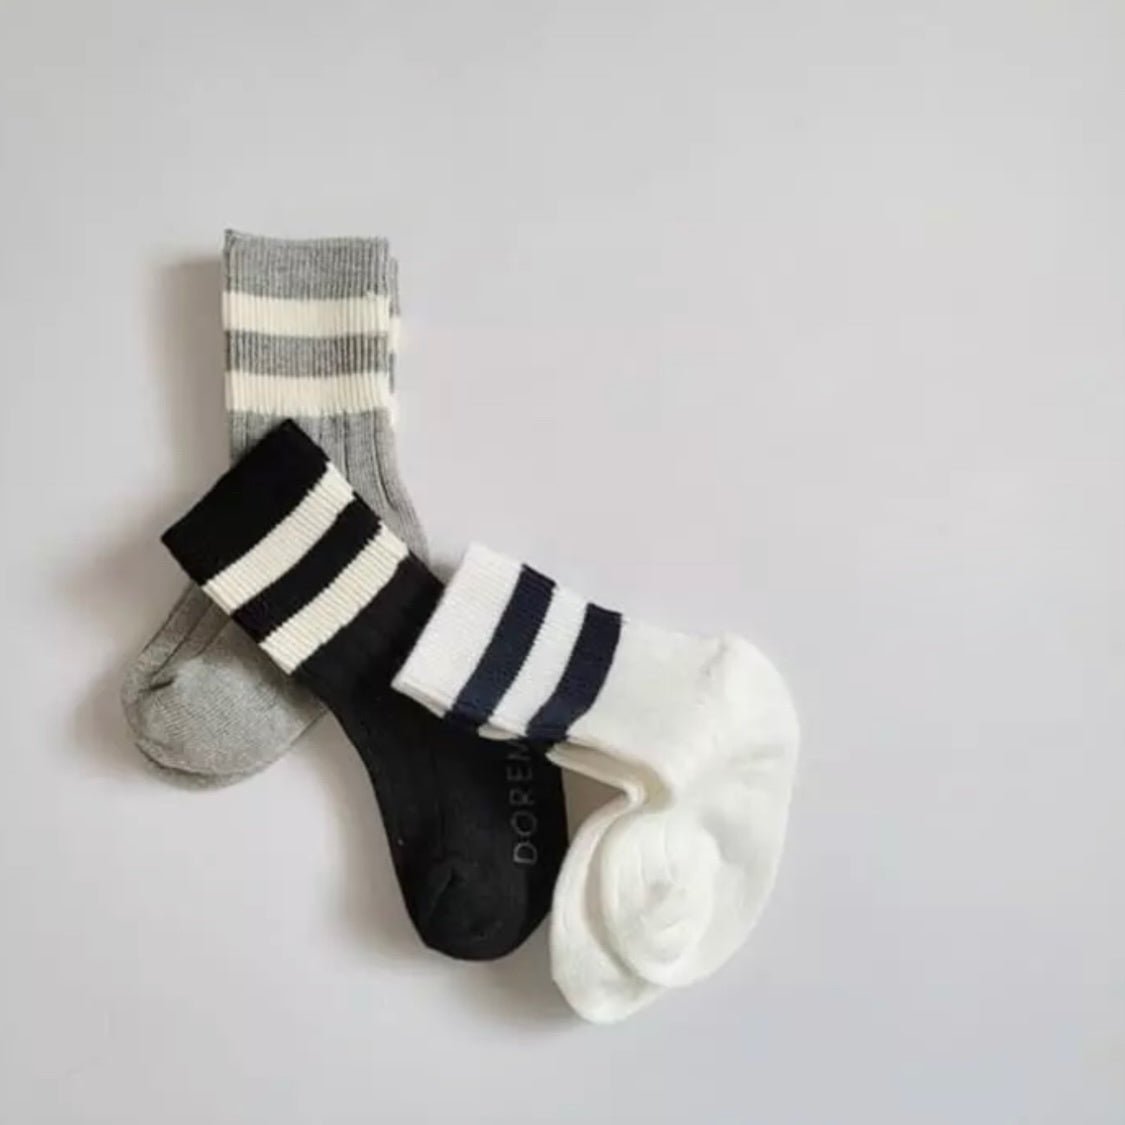 Low Low Socks (3er Set) find Stylish Fashion for Little People- at Little Foxx Concept Store